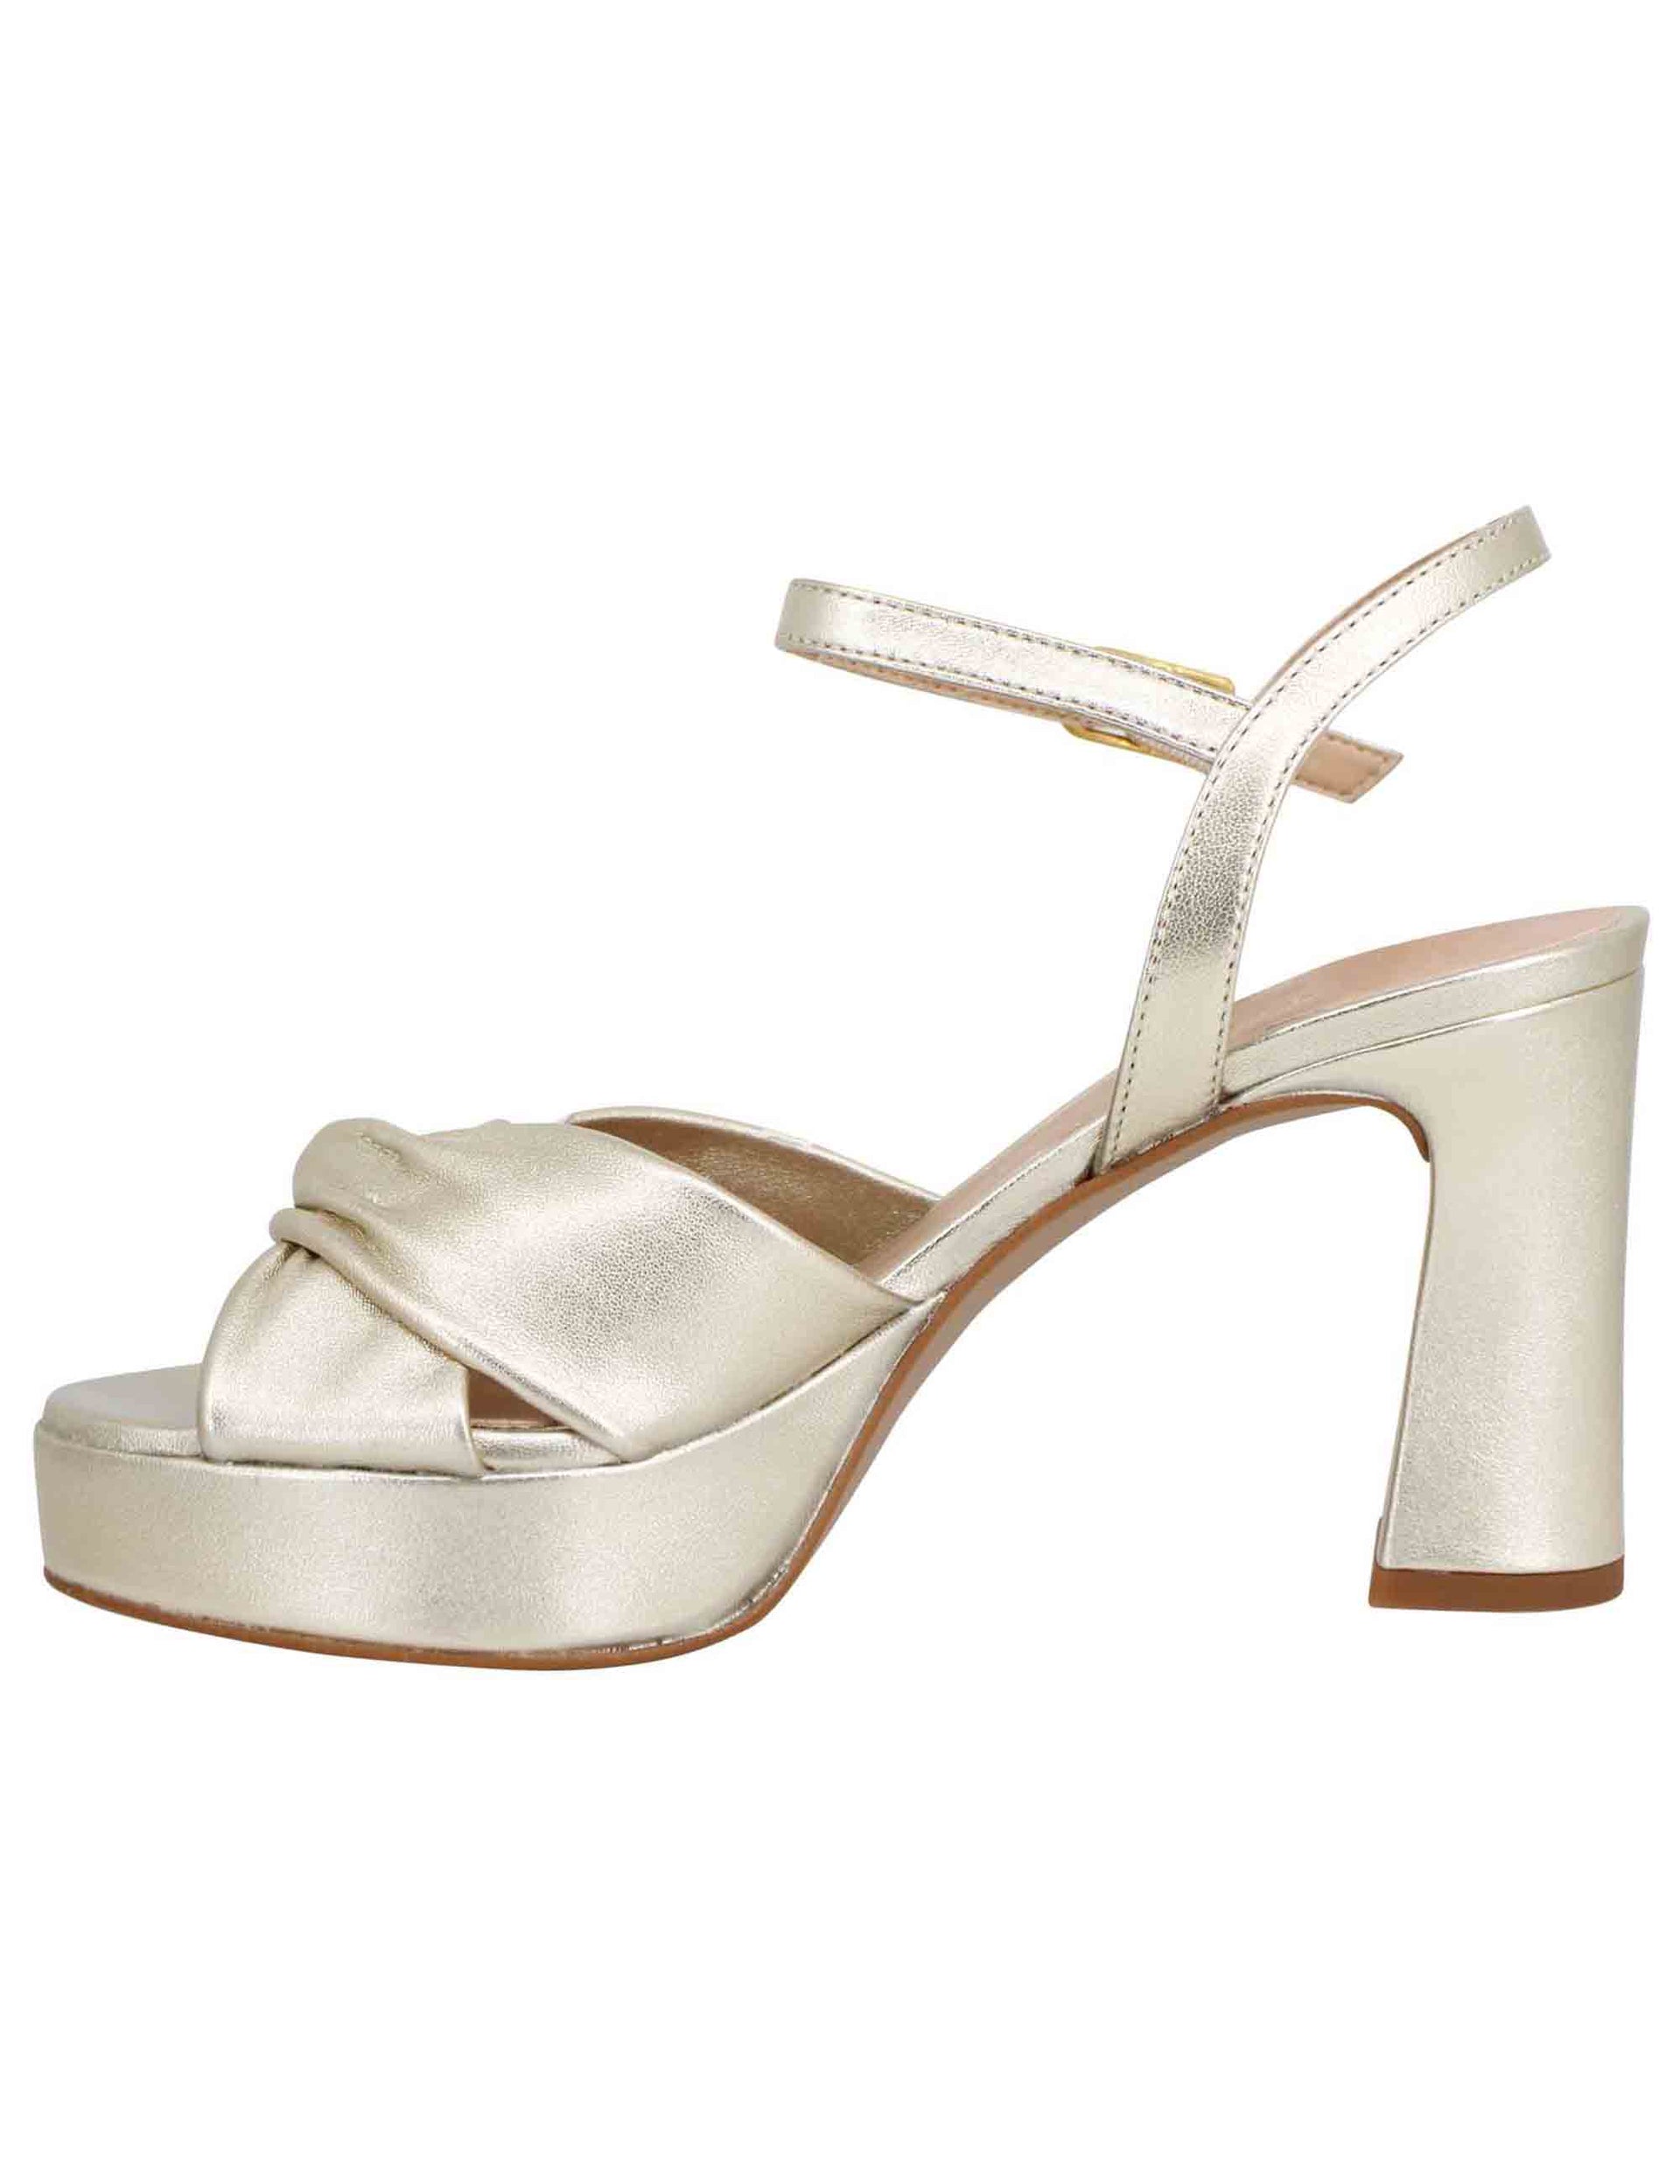 Women's sandals in platinum laminated leather with high heel and platform